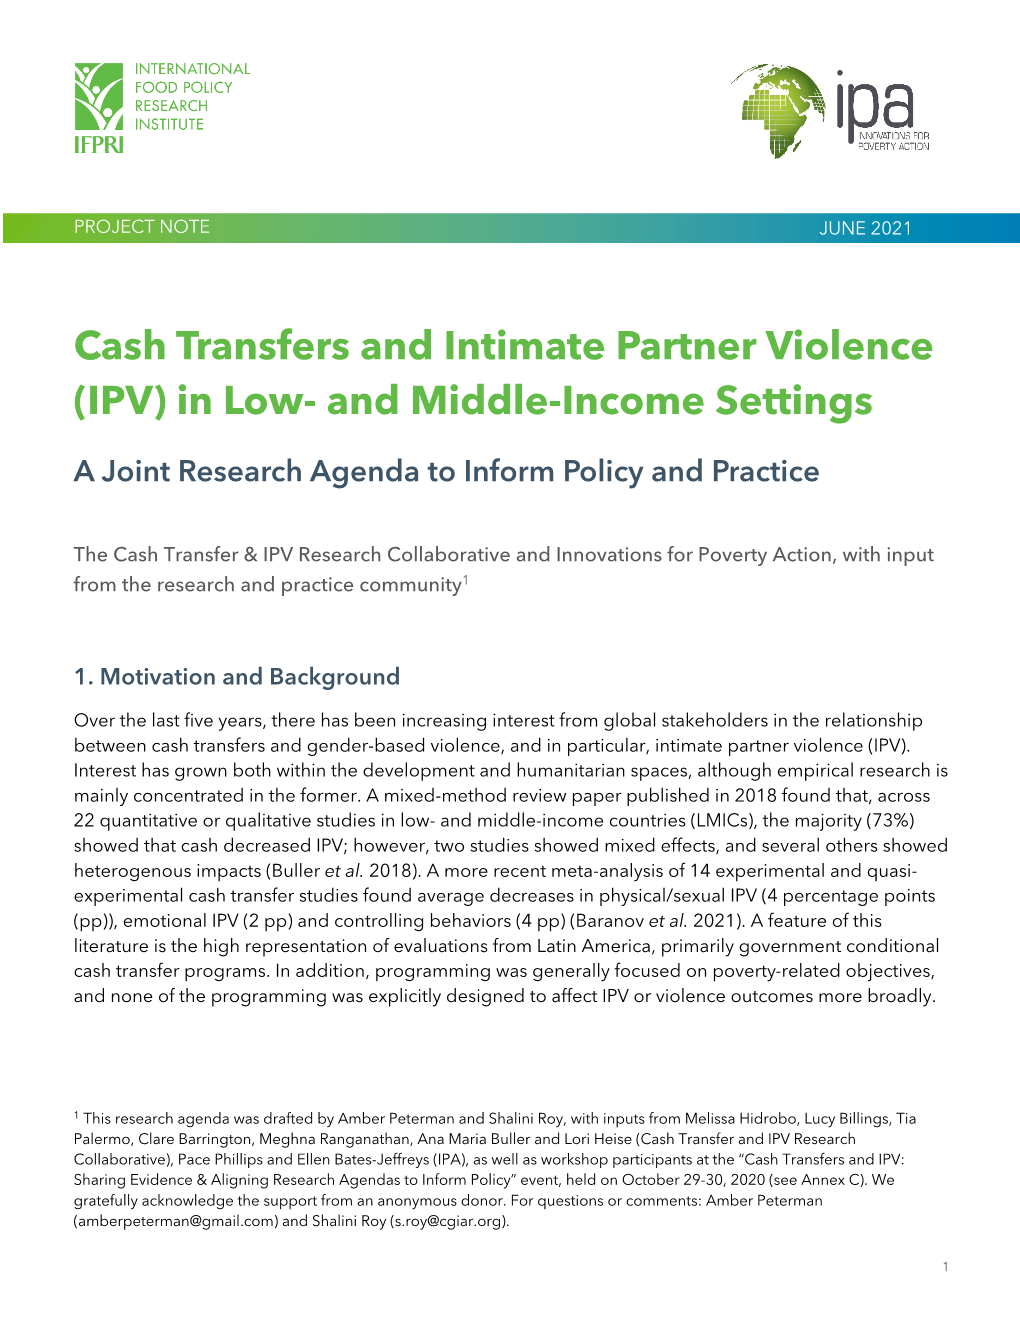 Cash Transfers and Intimate Partner Violence (IPV) in Low- and Middle-Income Settings